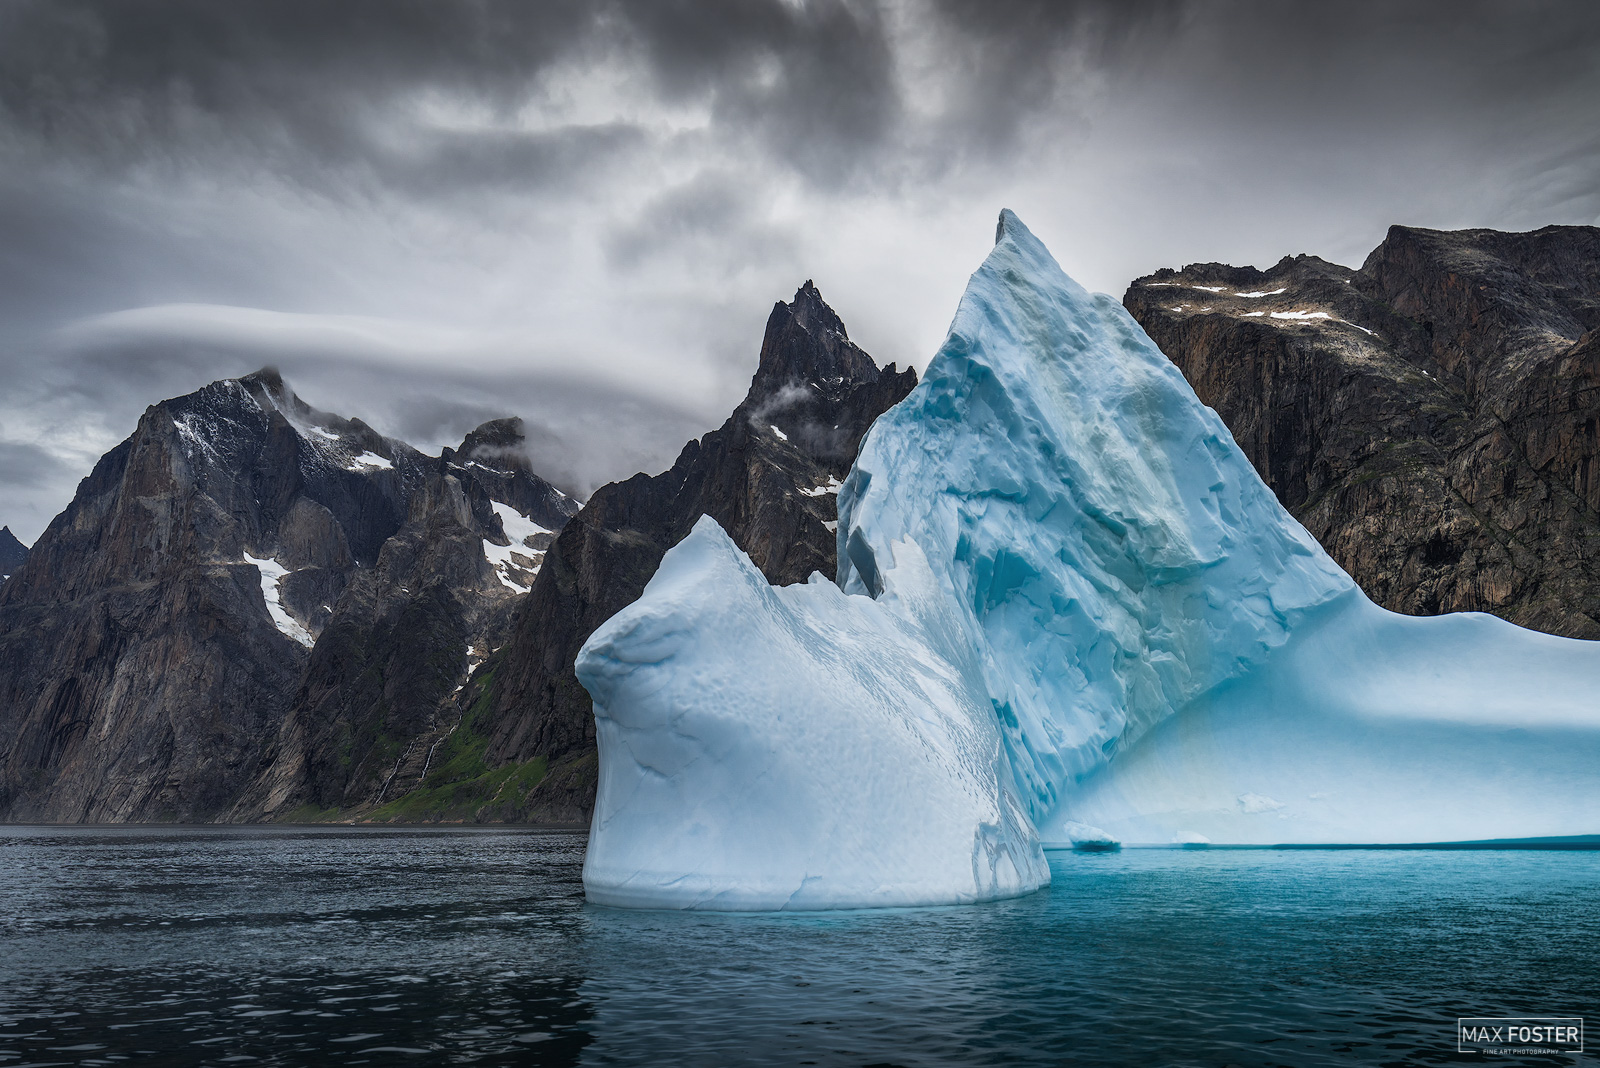 Bring your walls to life with Tip Of The Iceberg, Max Foster's limited edition photography print of an iceberg in Southern Greenland...